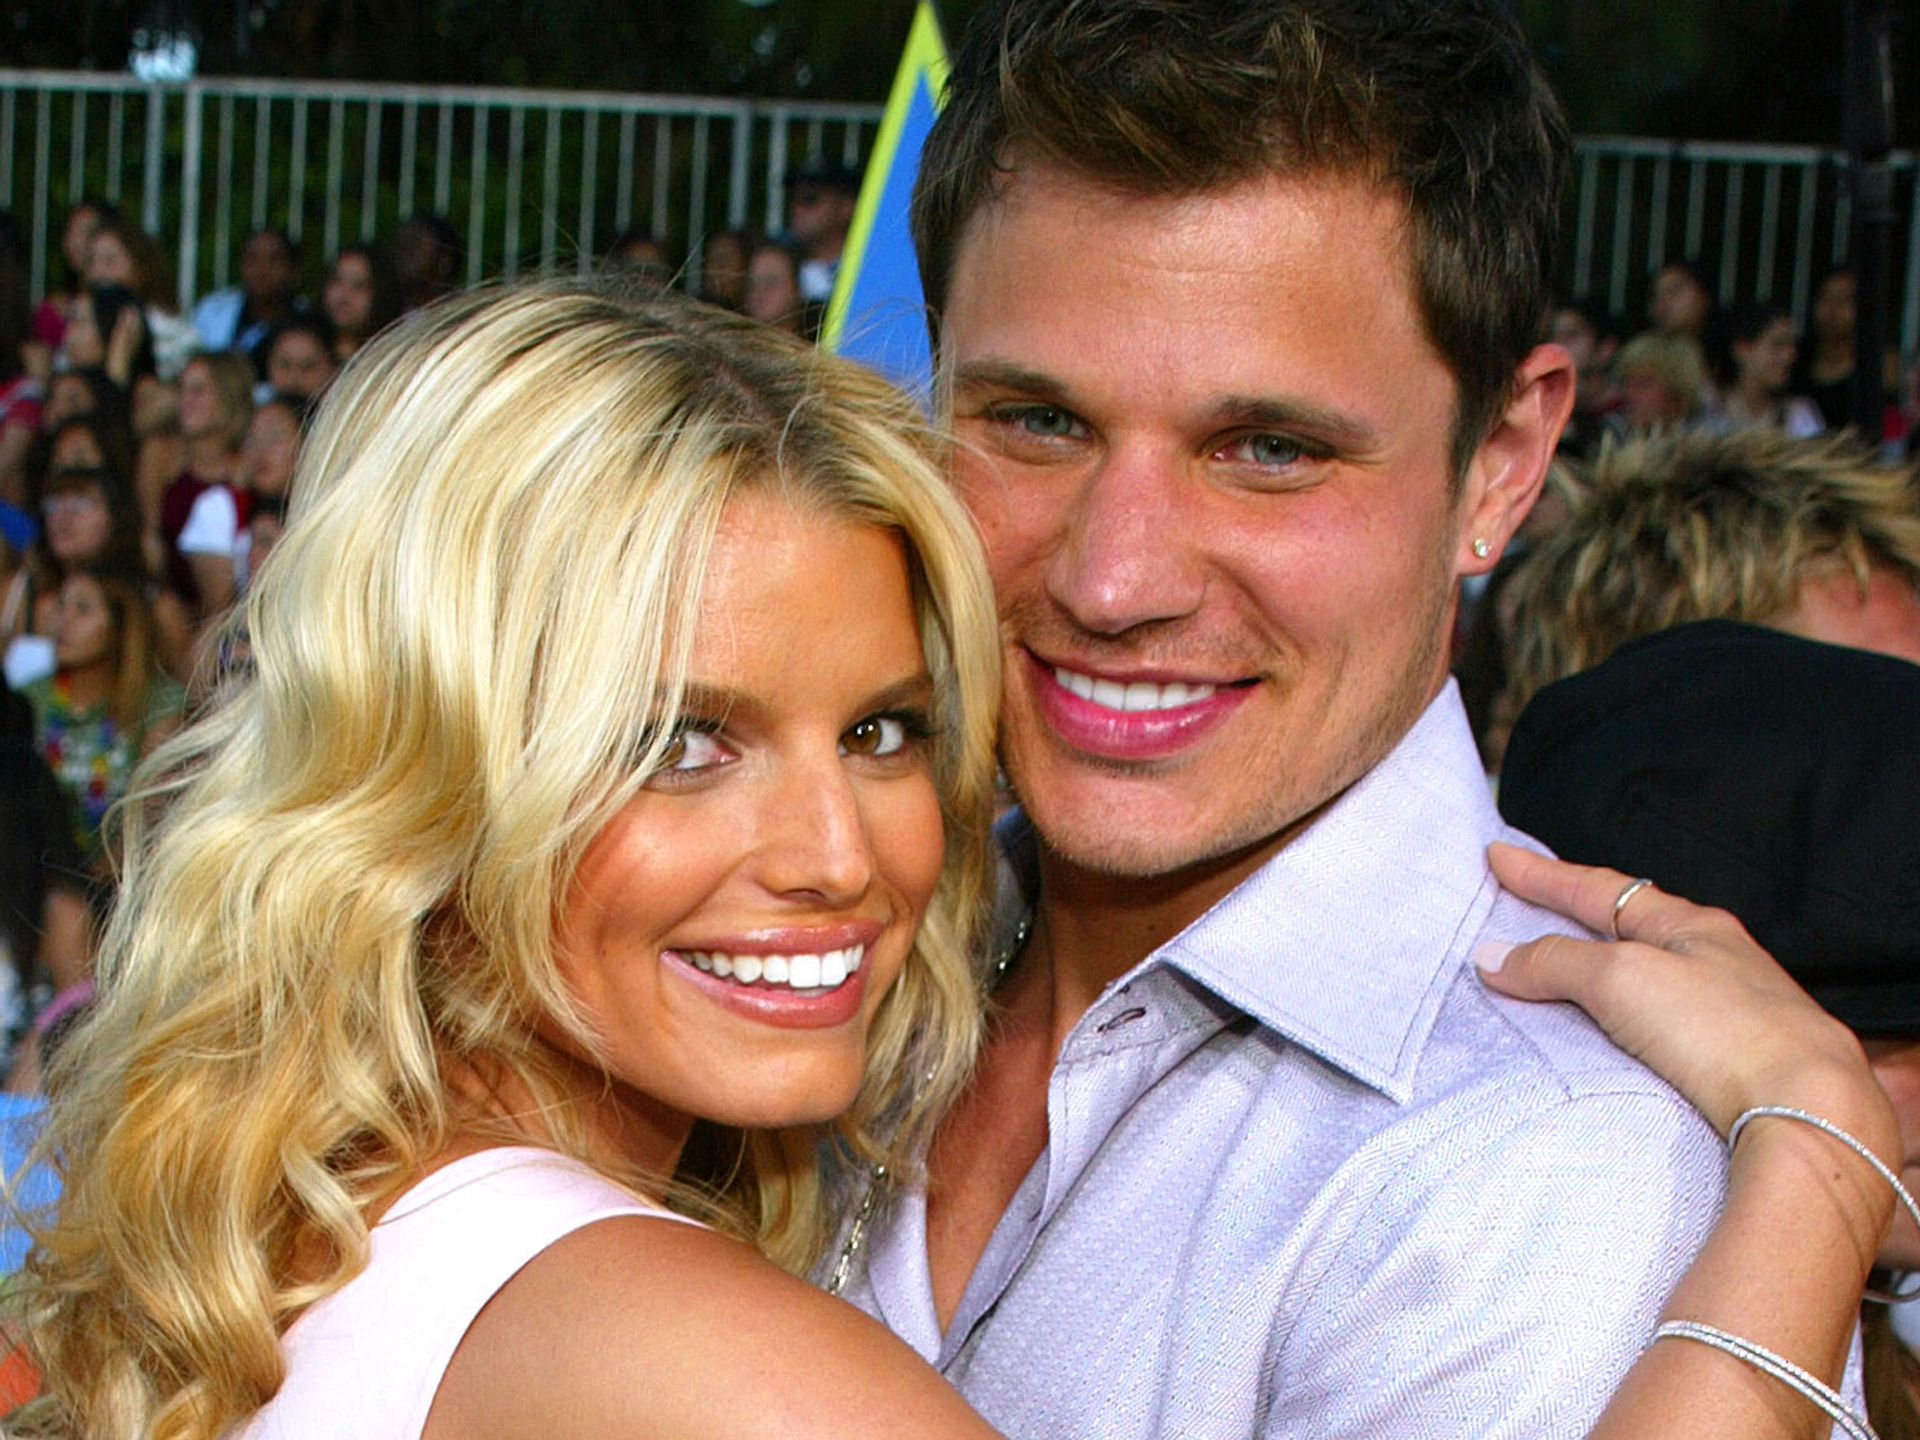 Jessica Simpson Reveals Her Marriage to Nick Lachey Was Her